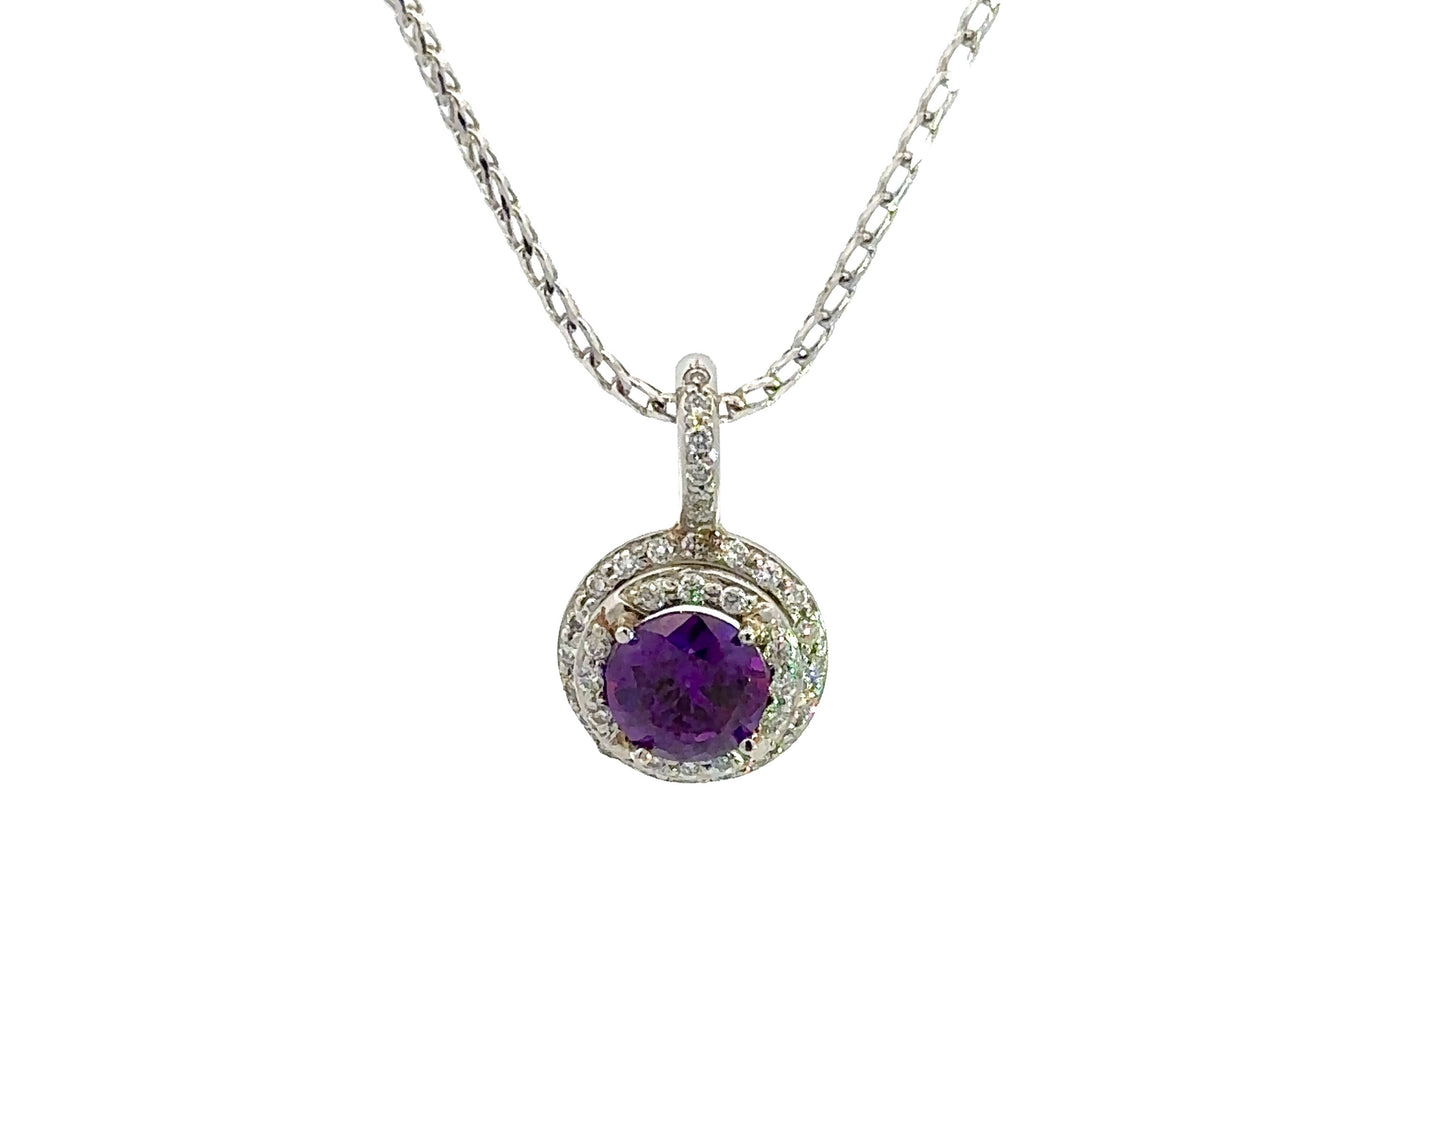 front of diamond and amethyst necklace with 1 large round amethyst purple gemstone in center and 2 rows of diamonds around amethyst